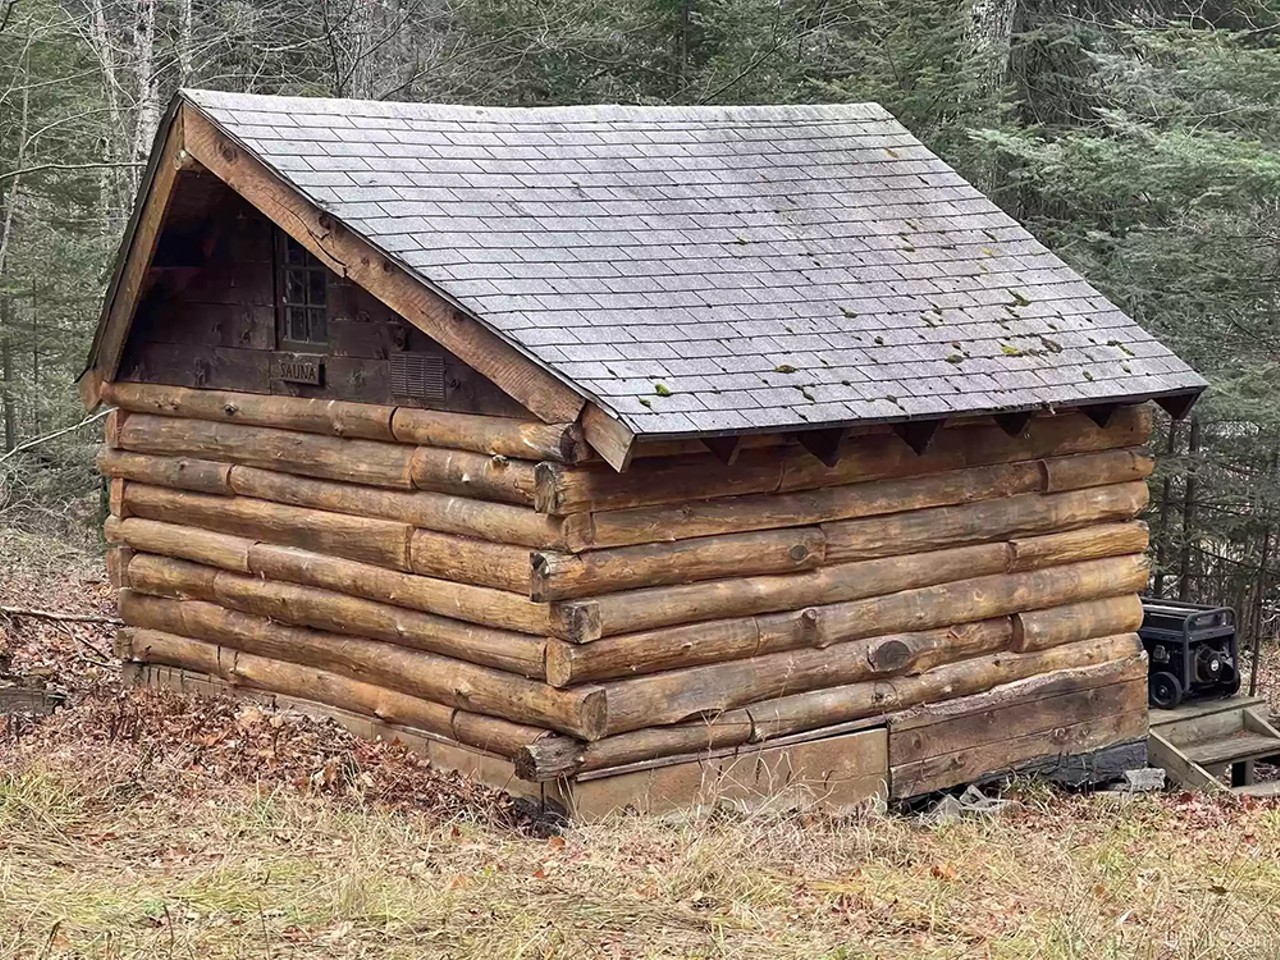 This little U.P. cabin comes with 20 acres